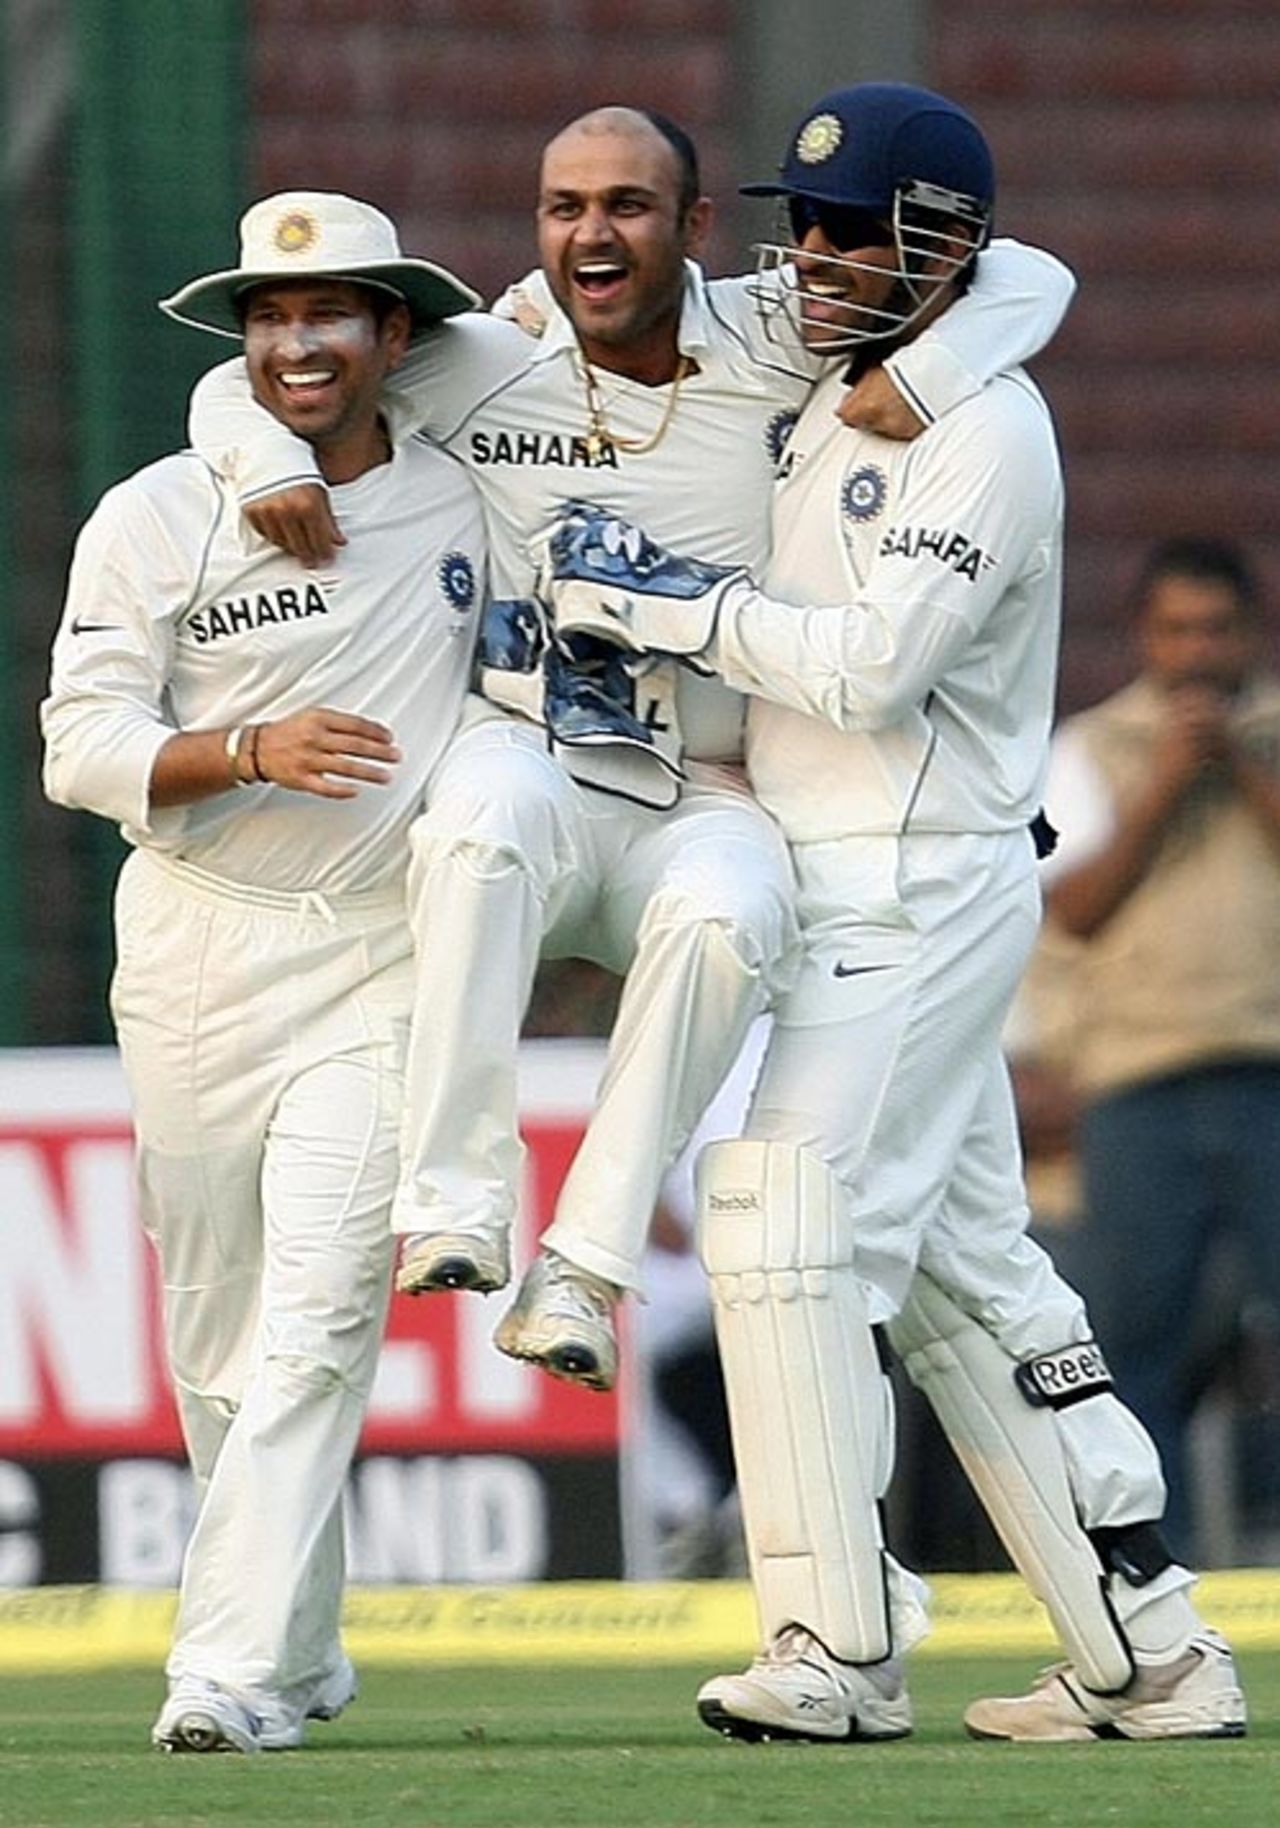 Sachin Tendulkar and Mahendra Singh Dhoni congratulate Virender Sehwag after the fall of Michael Hussey's wicket, India v Australia, 3rd Test, Delhi, 3rd day, October 31, 2008